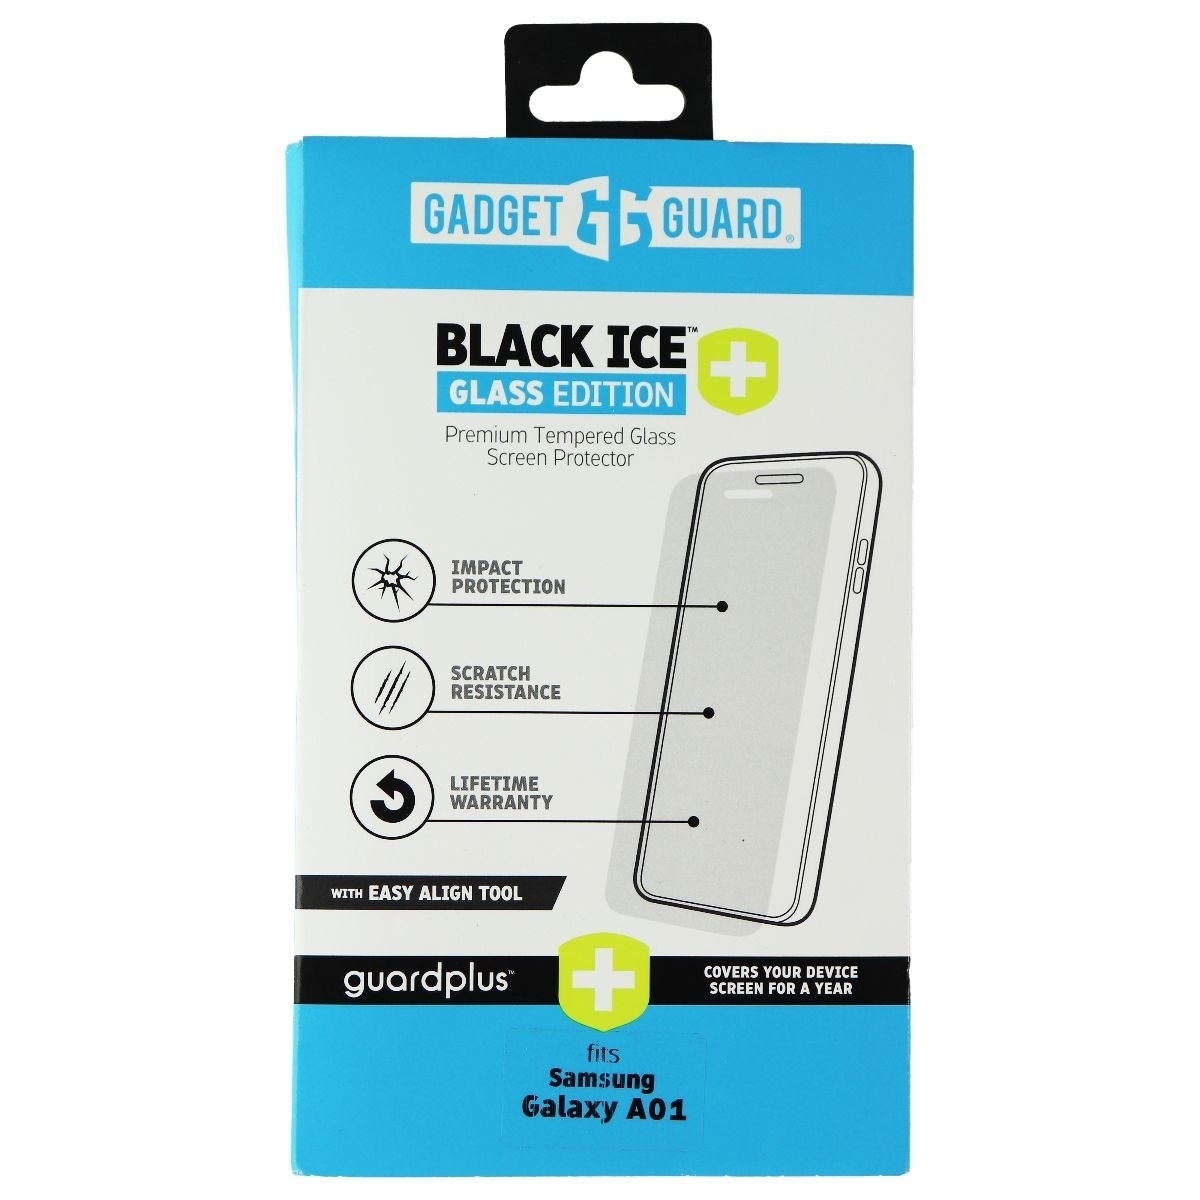 Gadget Guard Black Ice+ (Plus) Glass Edition For Samsung Galaxy A01 - Clear